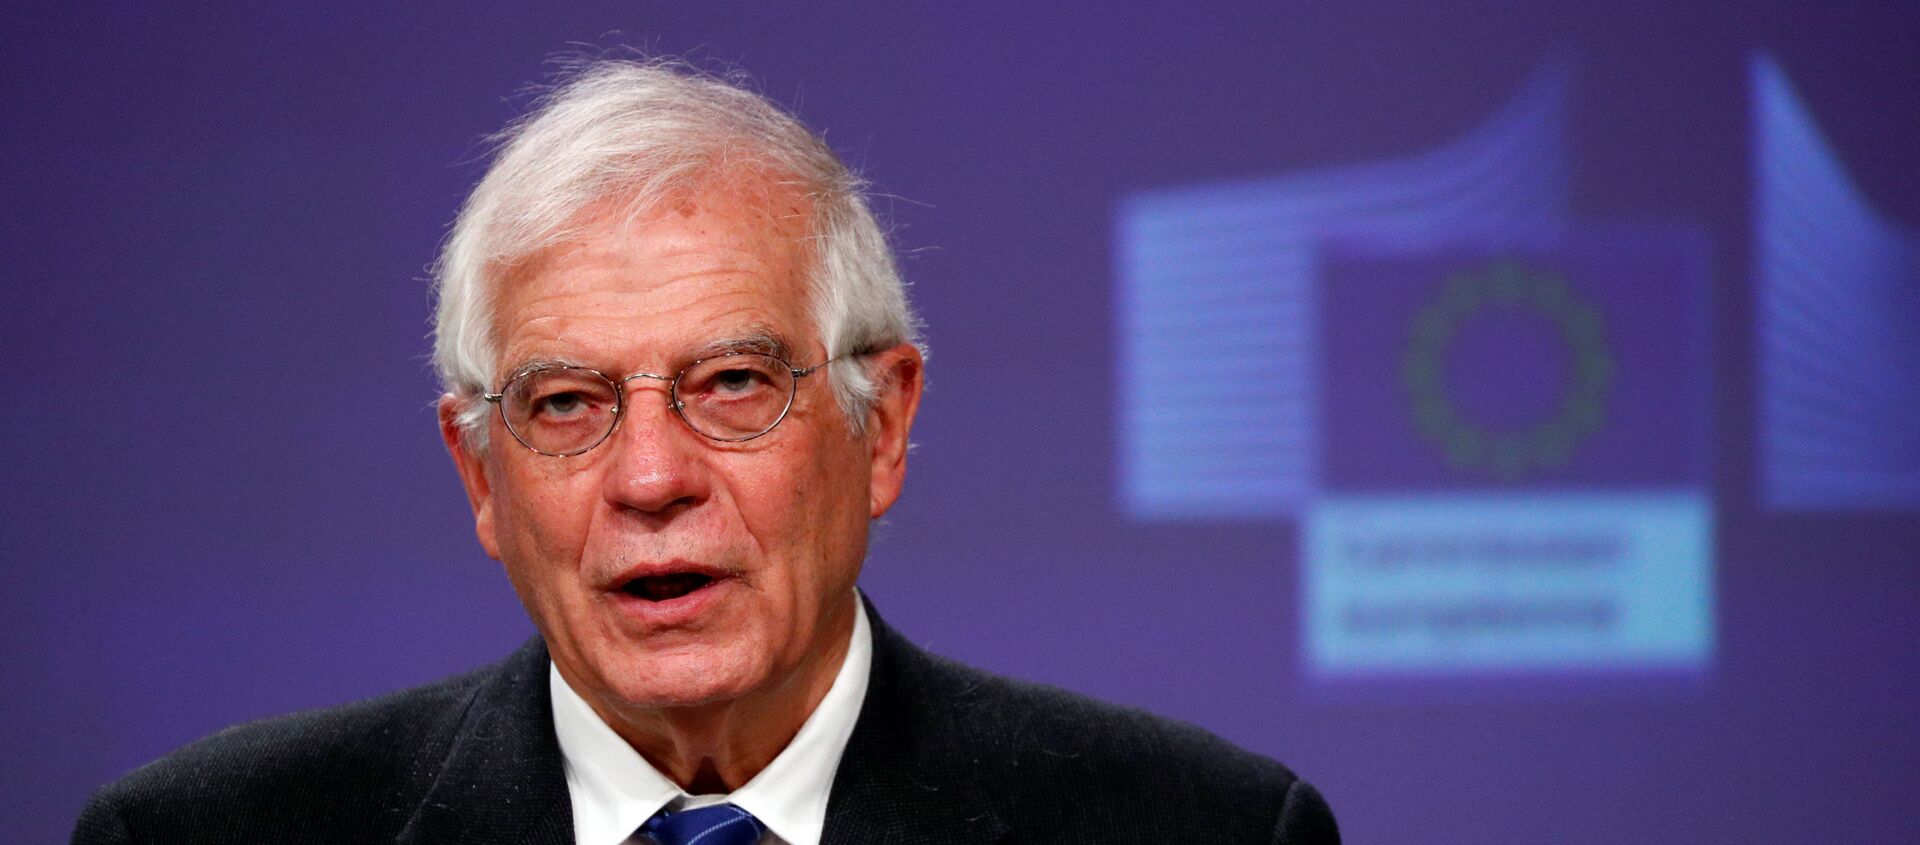 European High Representative for Foreign Affairs and Security Policy and Vice-President of the European Commission Josep Borrell, holds a virtual news conference on the approval of Operation Irini, at the European Commission in Brussels, Belgium March 31, 2020.  - Sputnik International, 1920, 06.04.2020